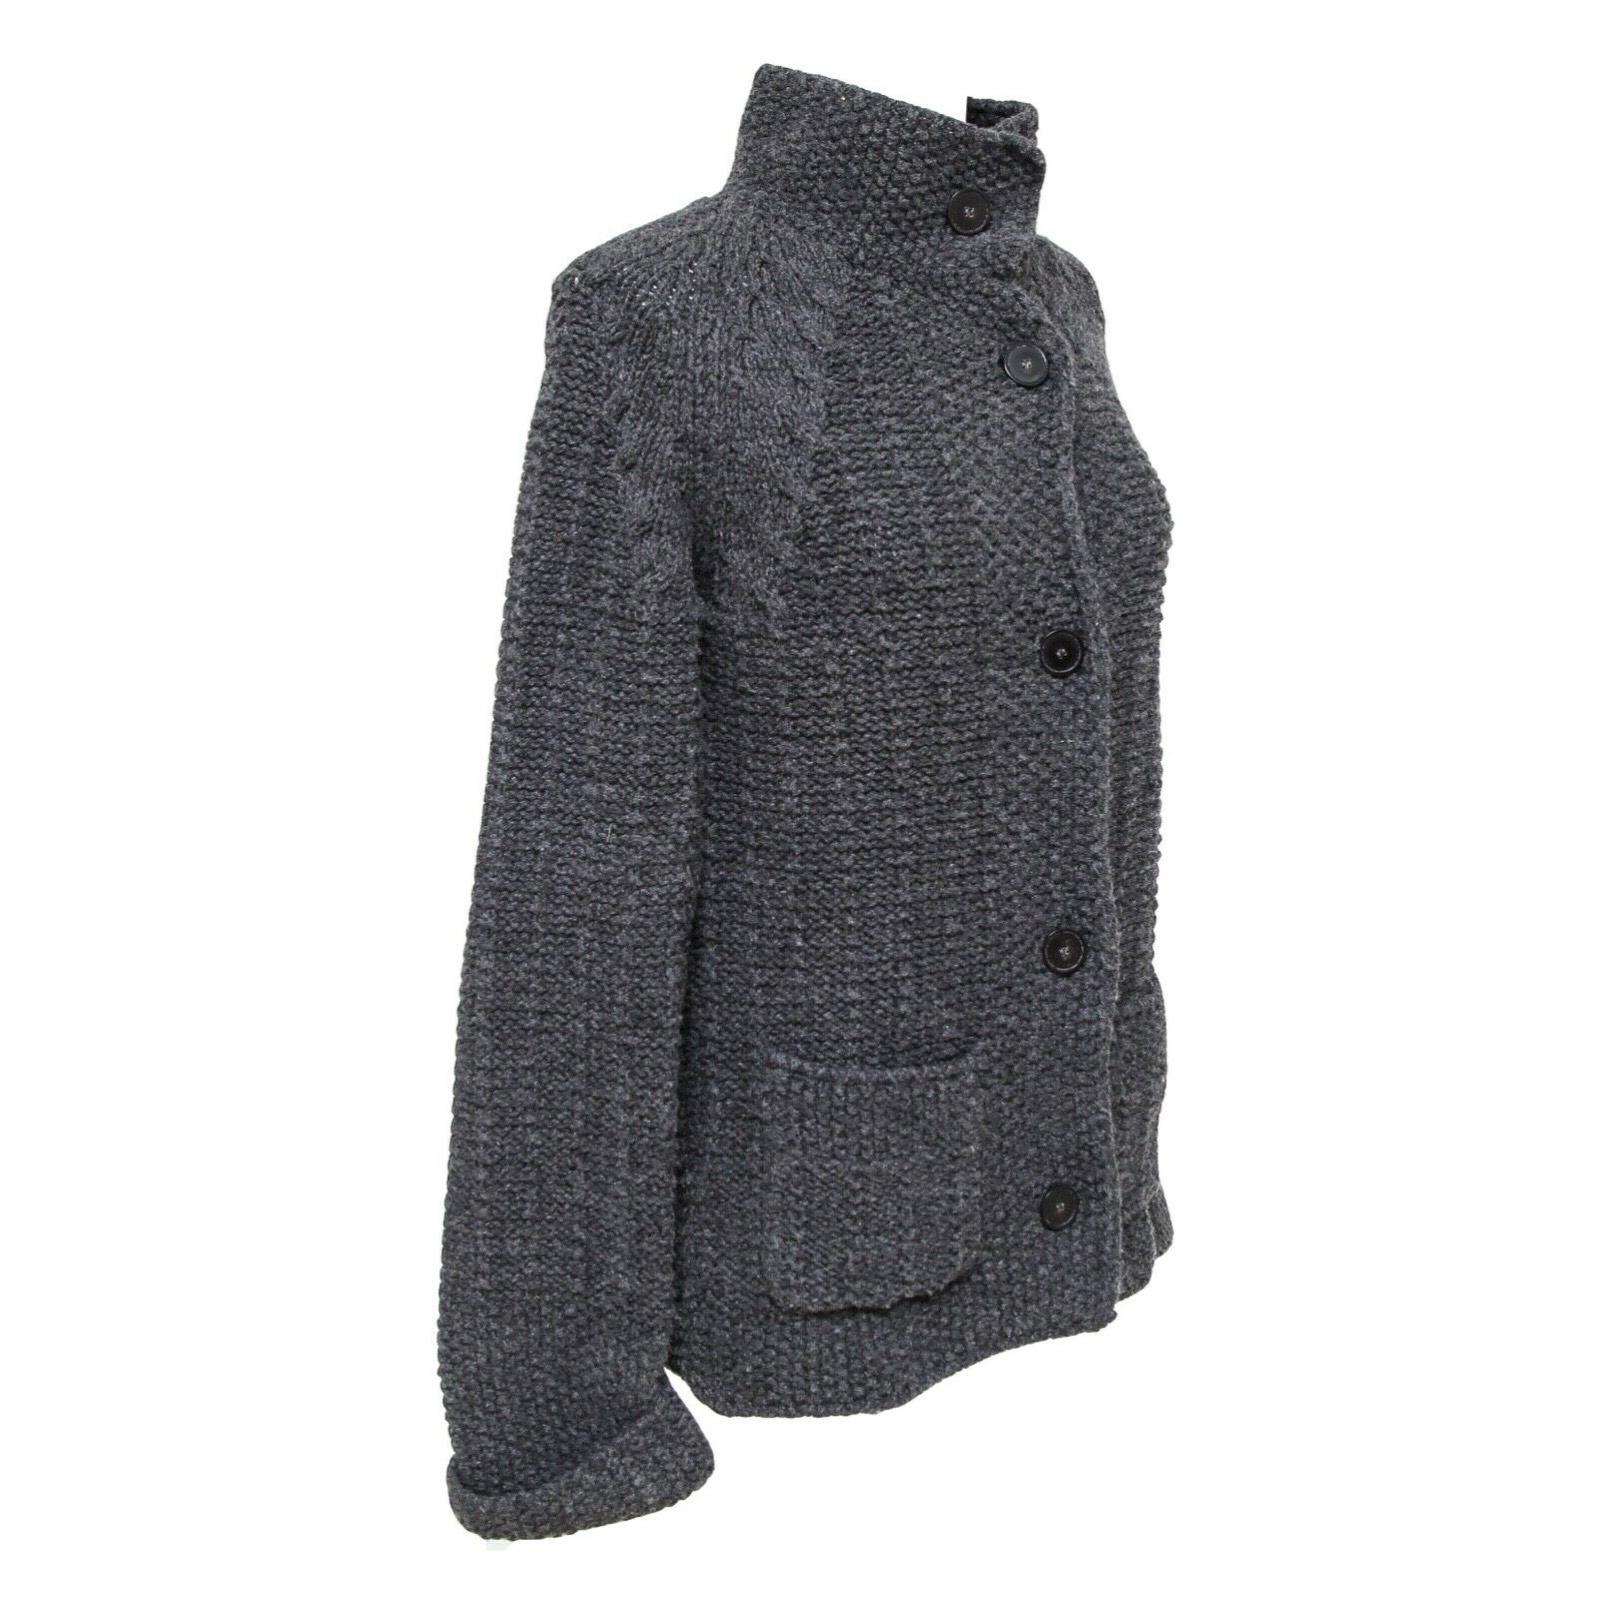 GUARANTEED AUTHENTIC CHLOE 2011 COLLECTION CHARCOAL GREY CARDIGAN JACKET

Retail excluding sales taxes $1,100

 

Details:
- Charcoal grey cardigan jacket has a great easy fit, perfect for those crisp fall days.
- Stand-up collar.
- Dual front patch